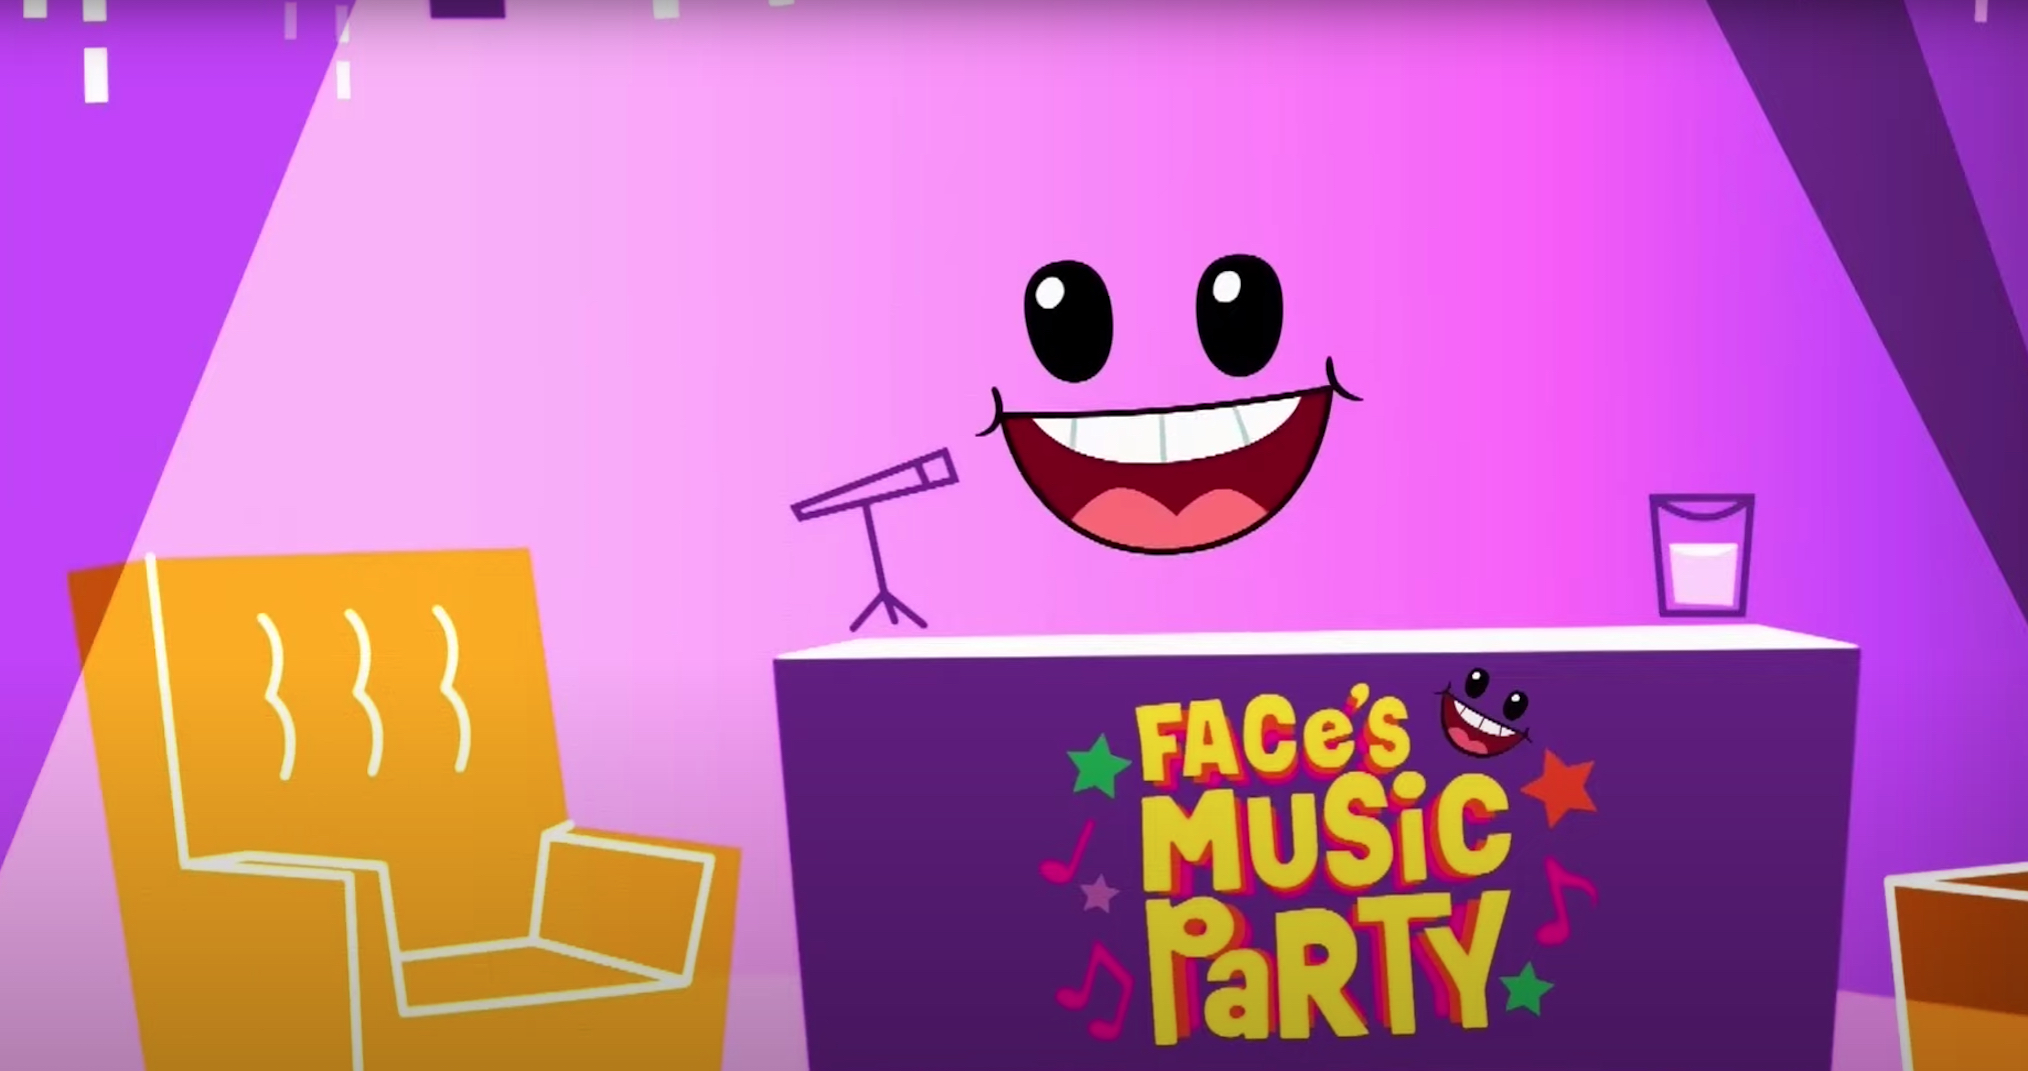 Face’s Music Party | Cedric Williams On His Excitement On Voicing The Beloved Nickelodeon 90’s Mascot [Exclusive]